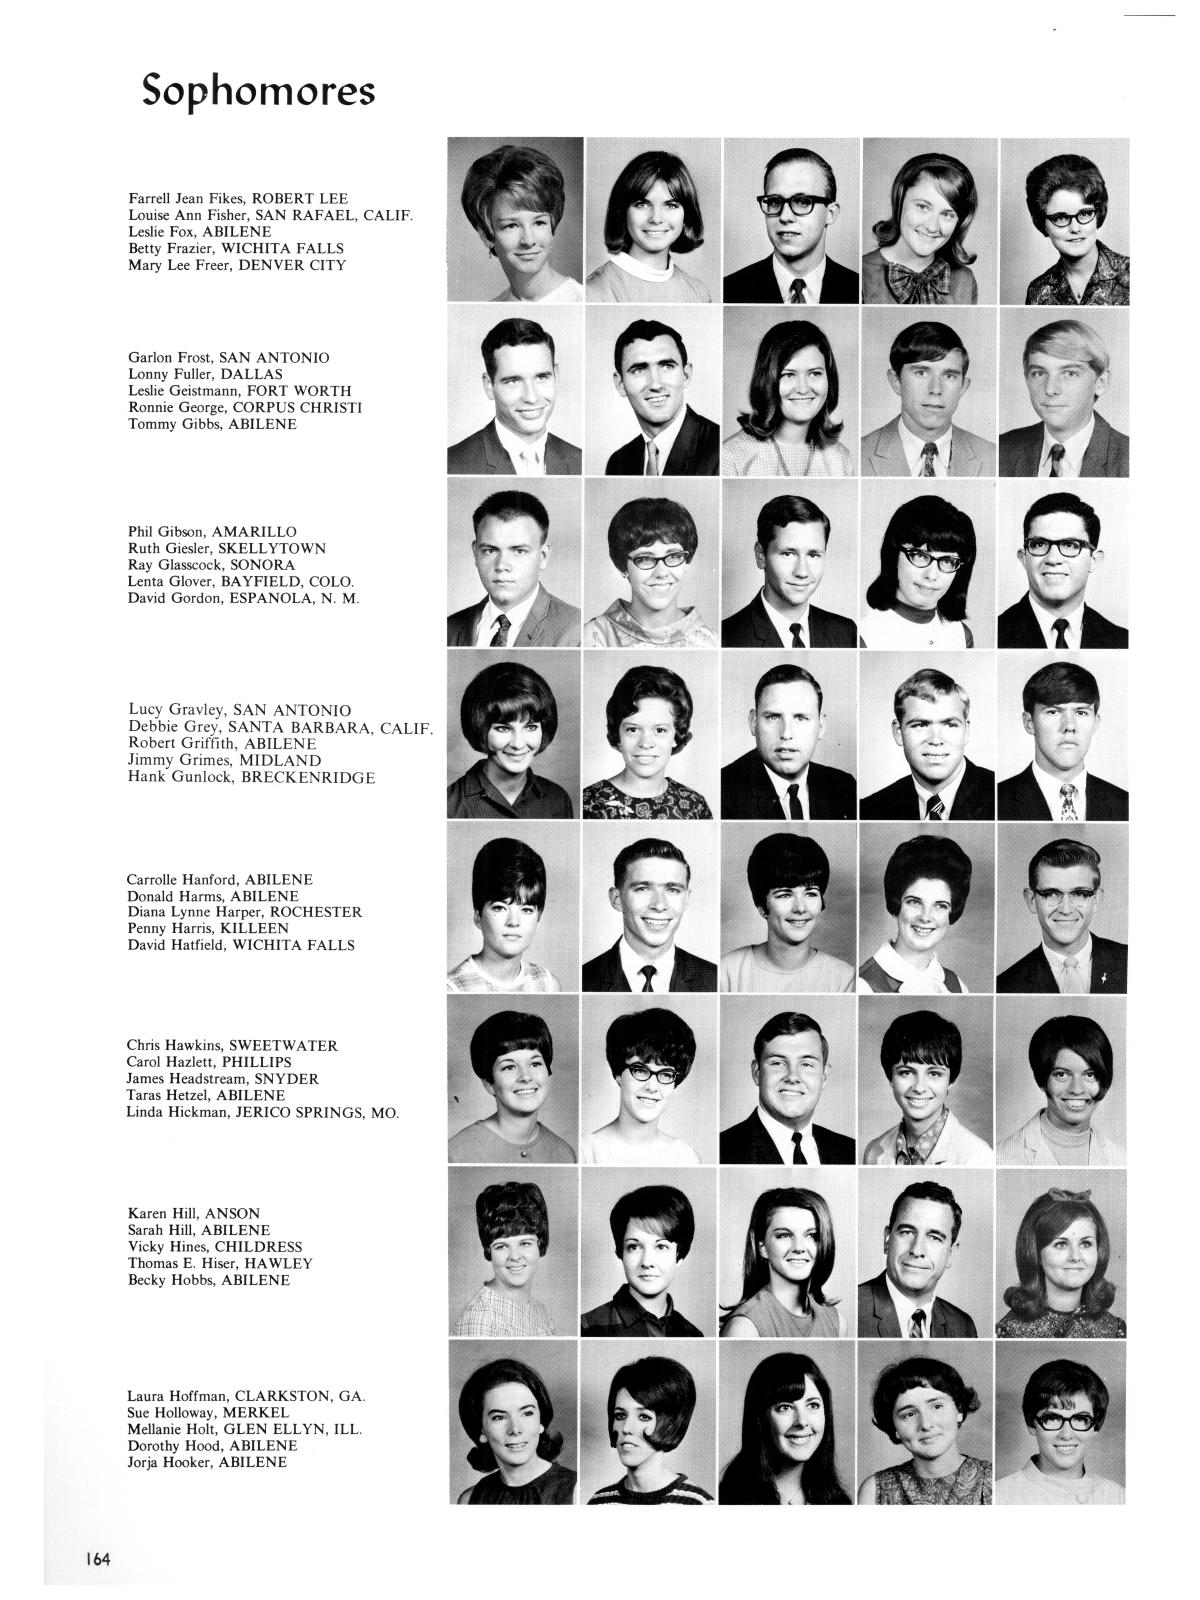 The Bronco, Yearbook of Hardin-Simmons University, 1968 - Page 164 - The  Portal to Texas History